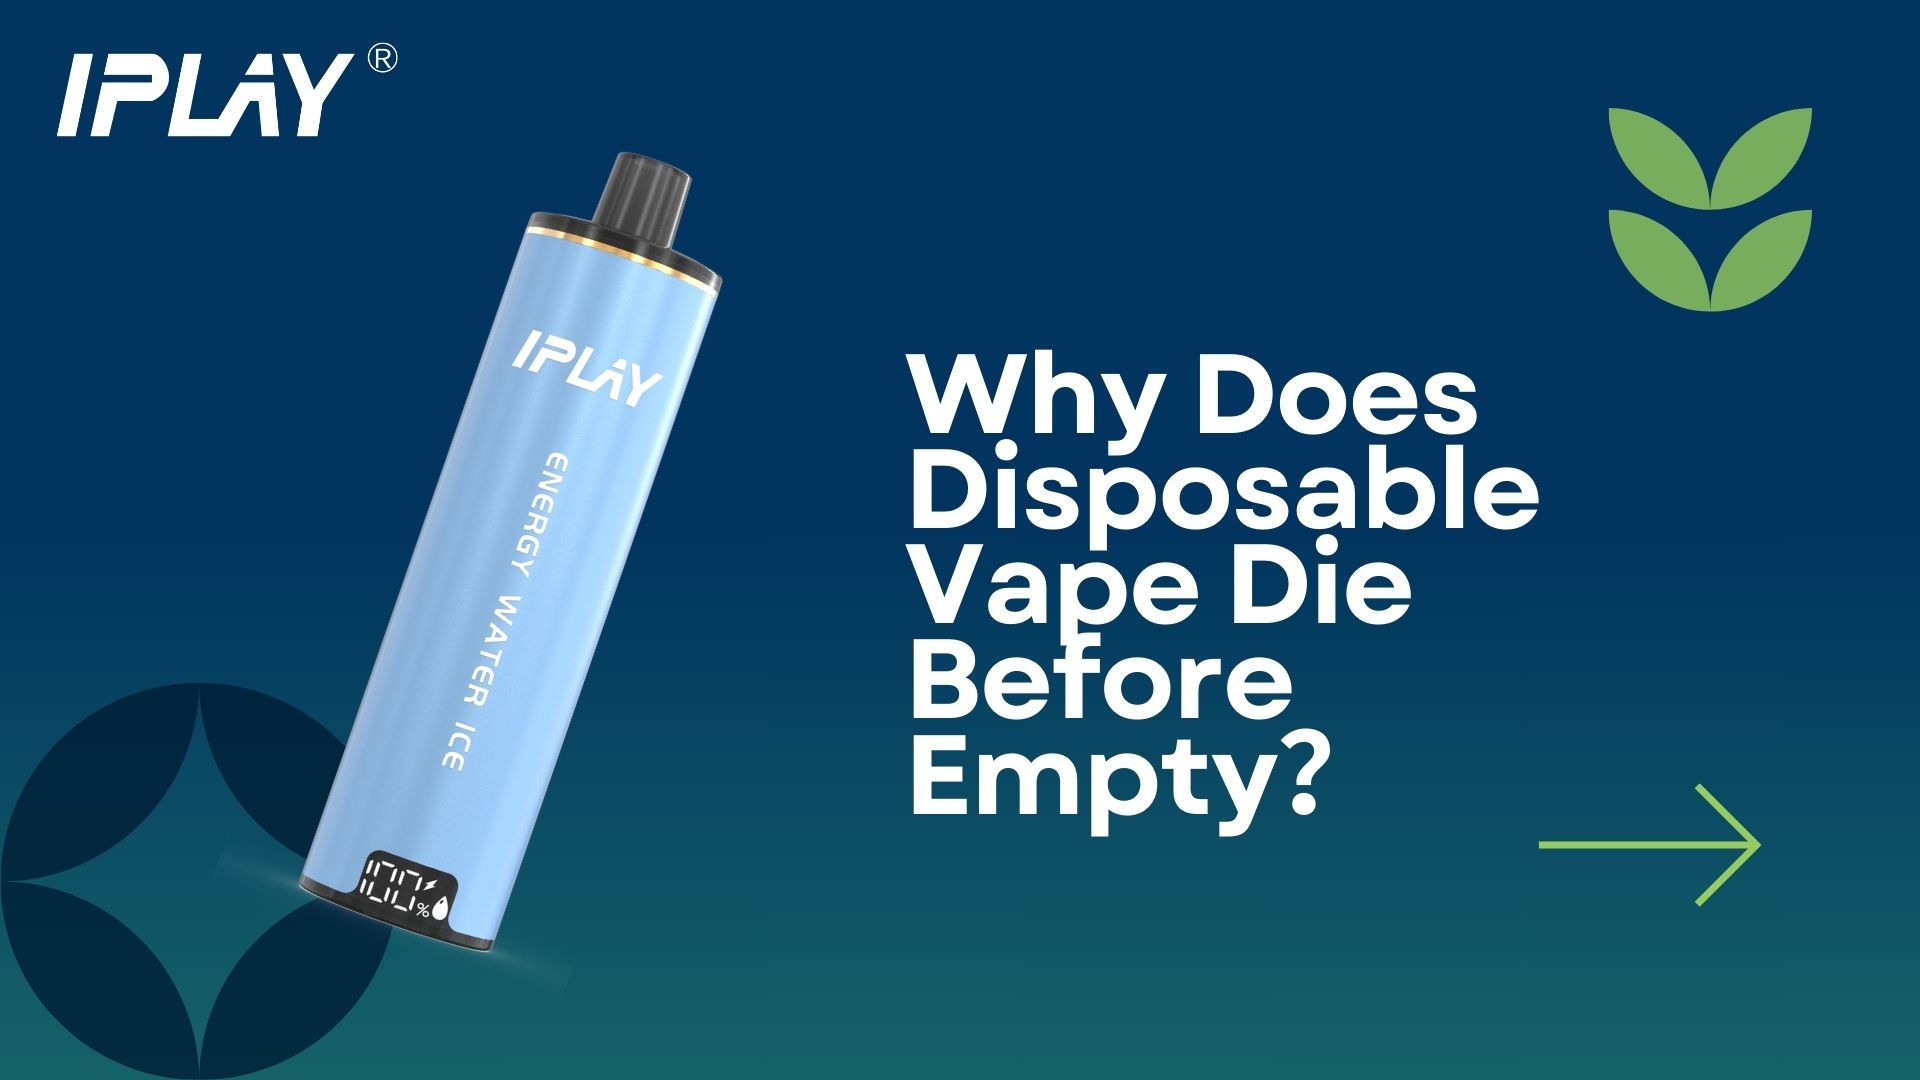 Why Does Disposable Vape Die Before Empty